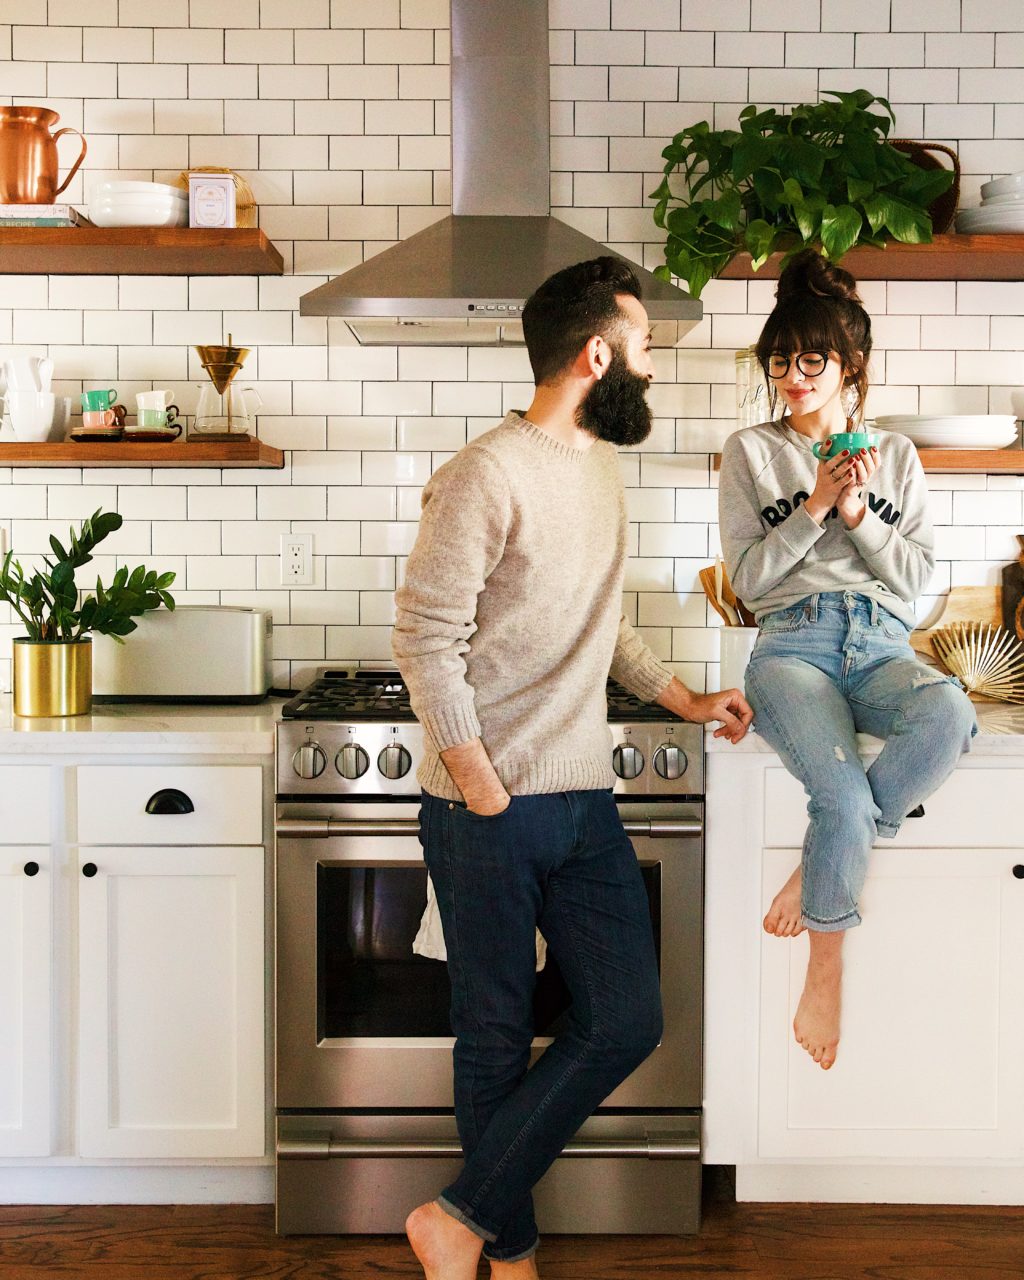 Couples Photos at Home - Cozy Mornings